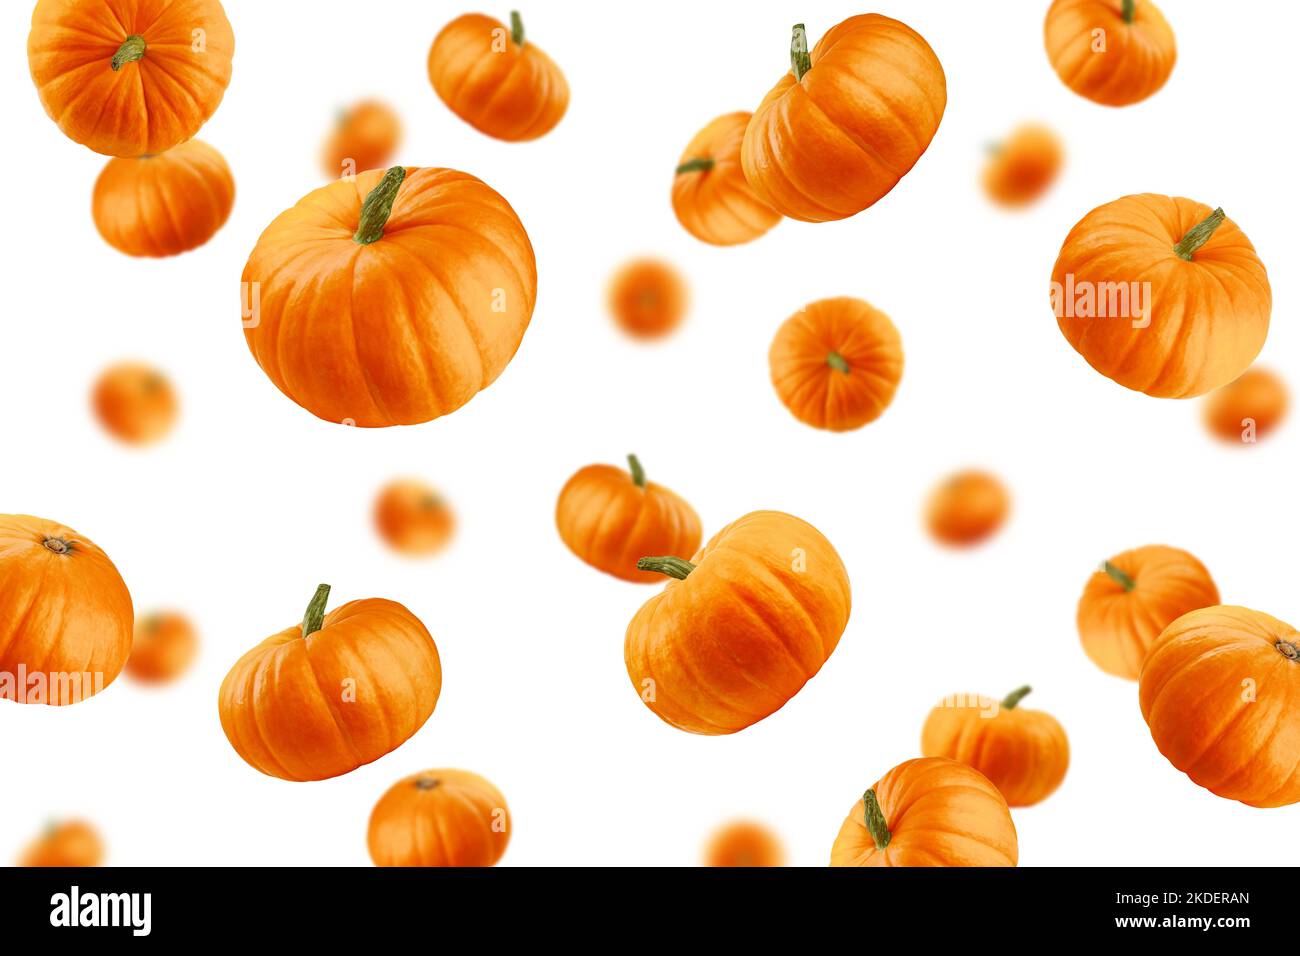 Falling Pumpkin isolated on white background, selective focus Stock Photo